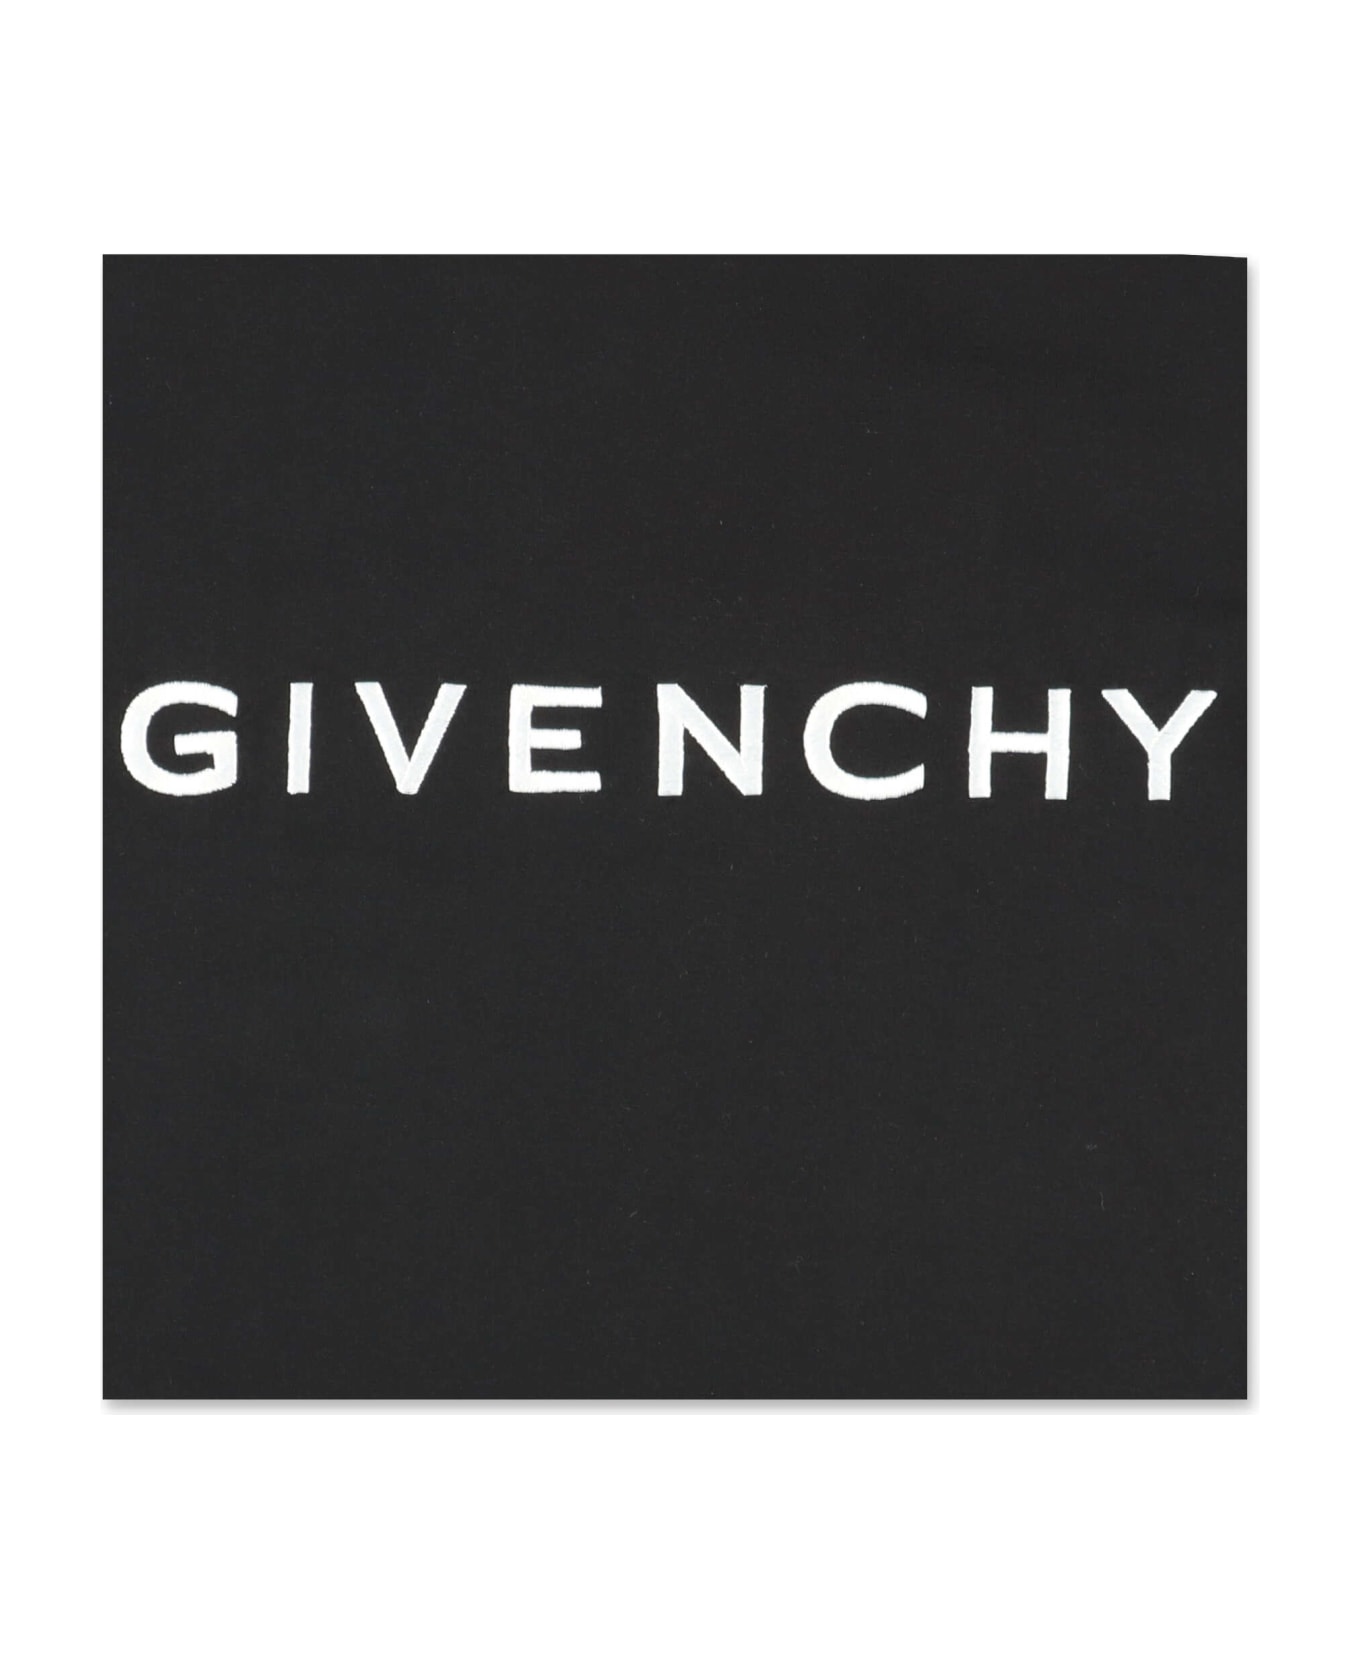 Givenchy T-shirt Nera In Jersey Di Cotone - Nero